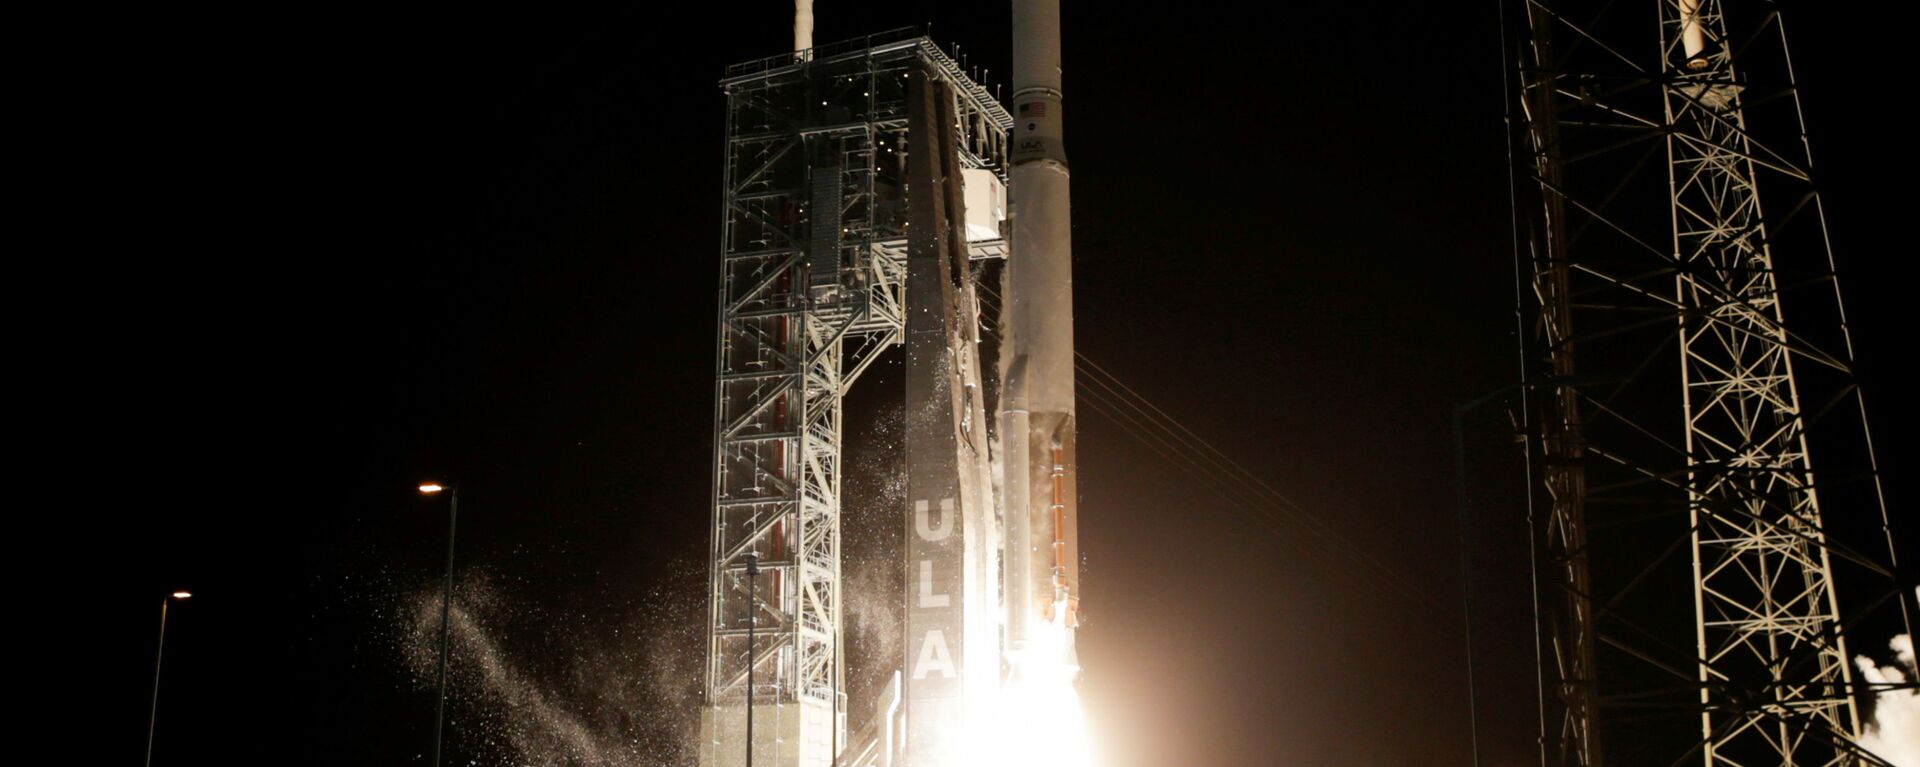 The Boeing CST-100 Starliner spacecraft, atop a ULA Atlas V rocket, lifts off for an uncrewed Orbital Flight Test to the International Space Station from launch complex 40 at the Cape Canaveral Air Force Station in Cape Canaveral, Florida December 20, 2019. REUTERS/Joe Skipper/File Photo - Sputnik International, 1920, 02.06.2023